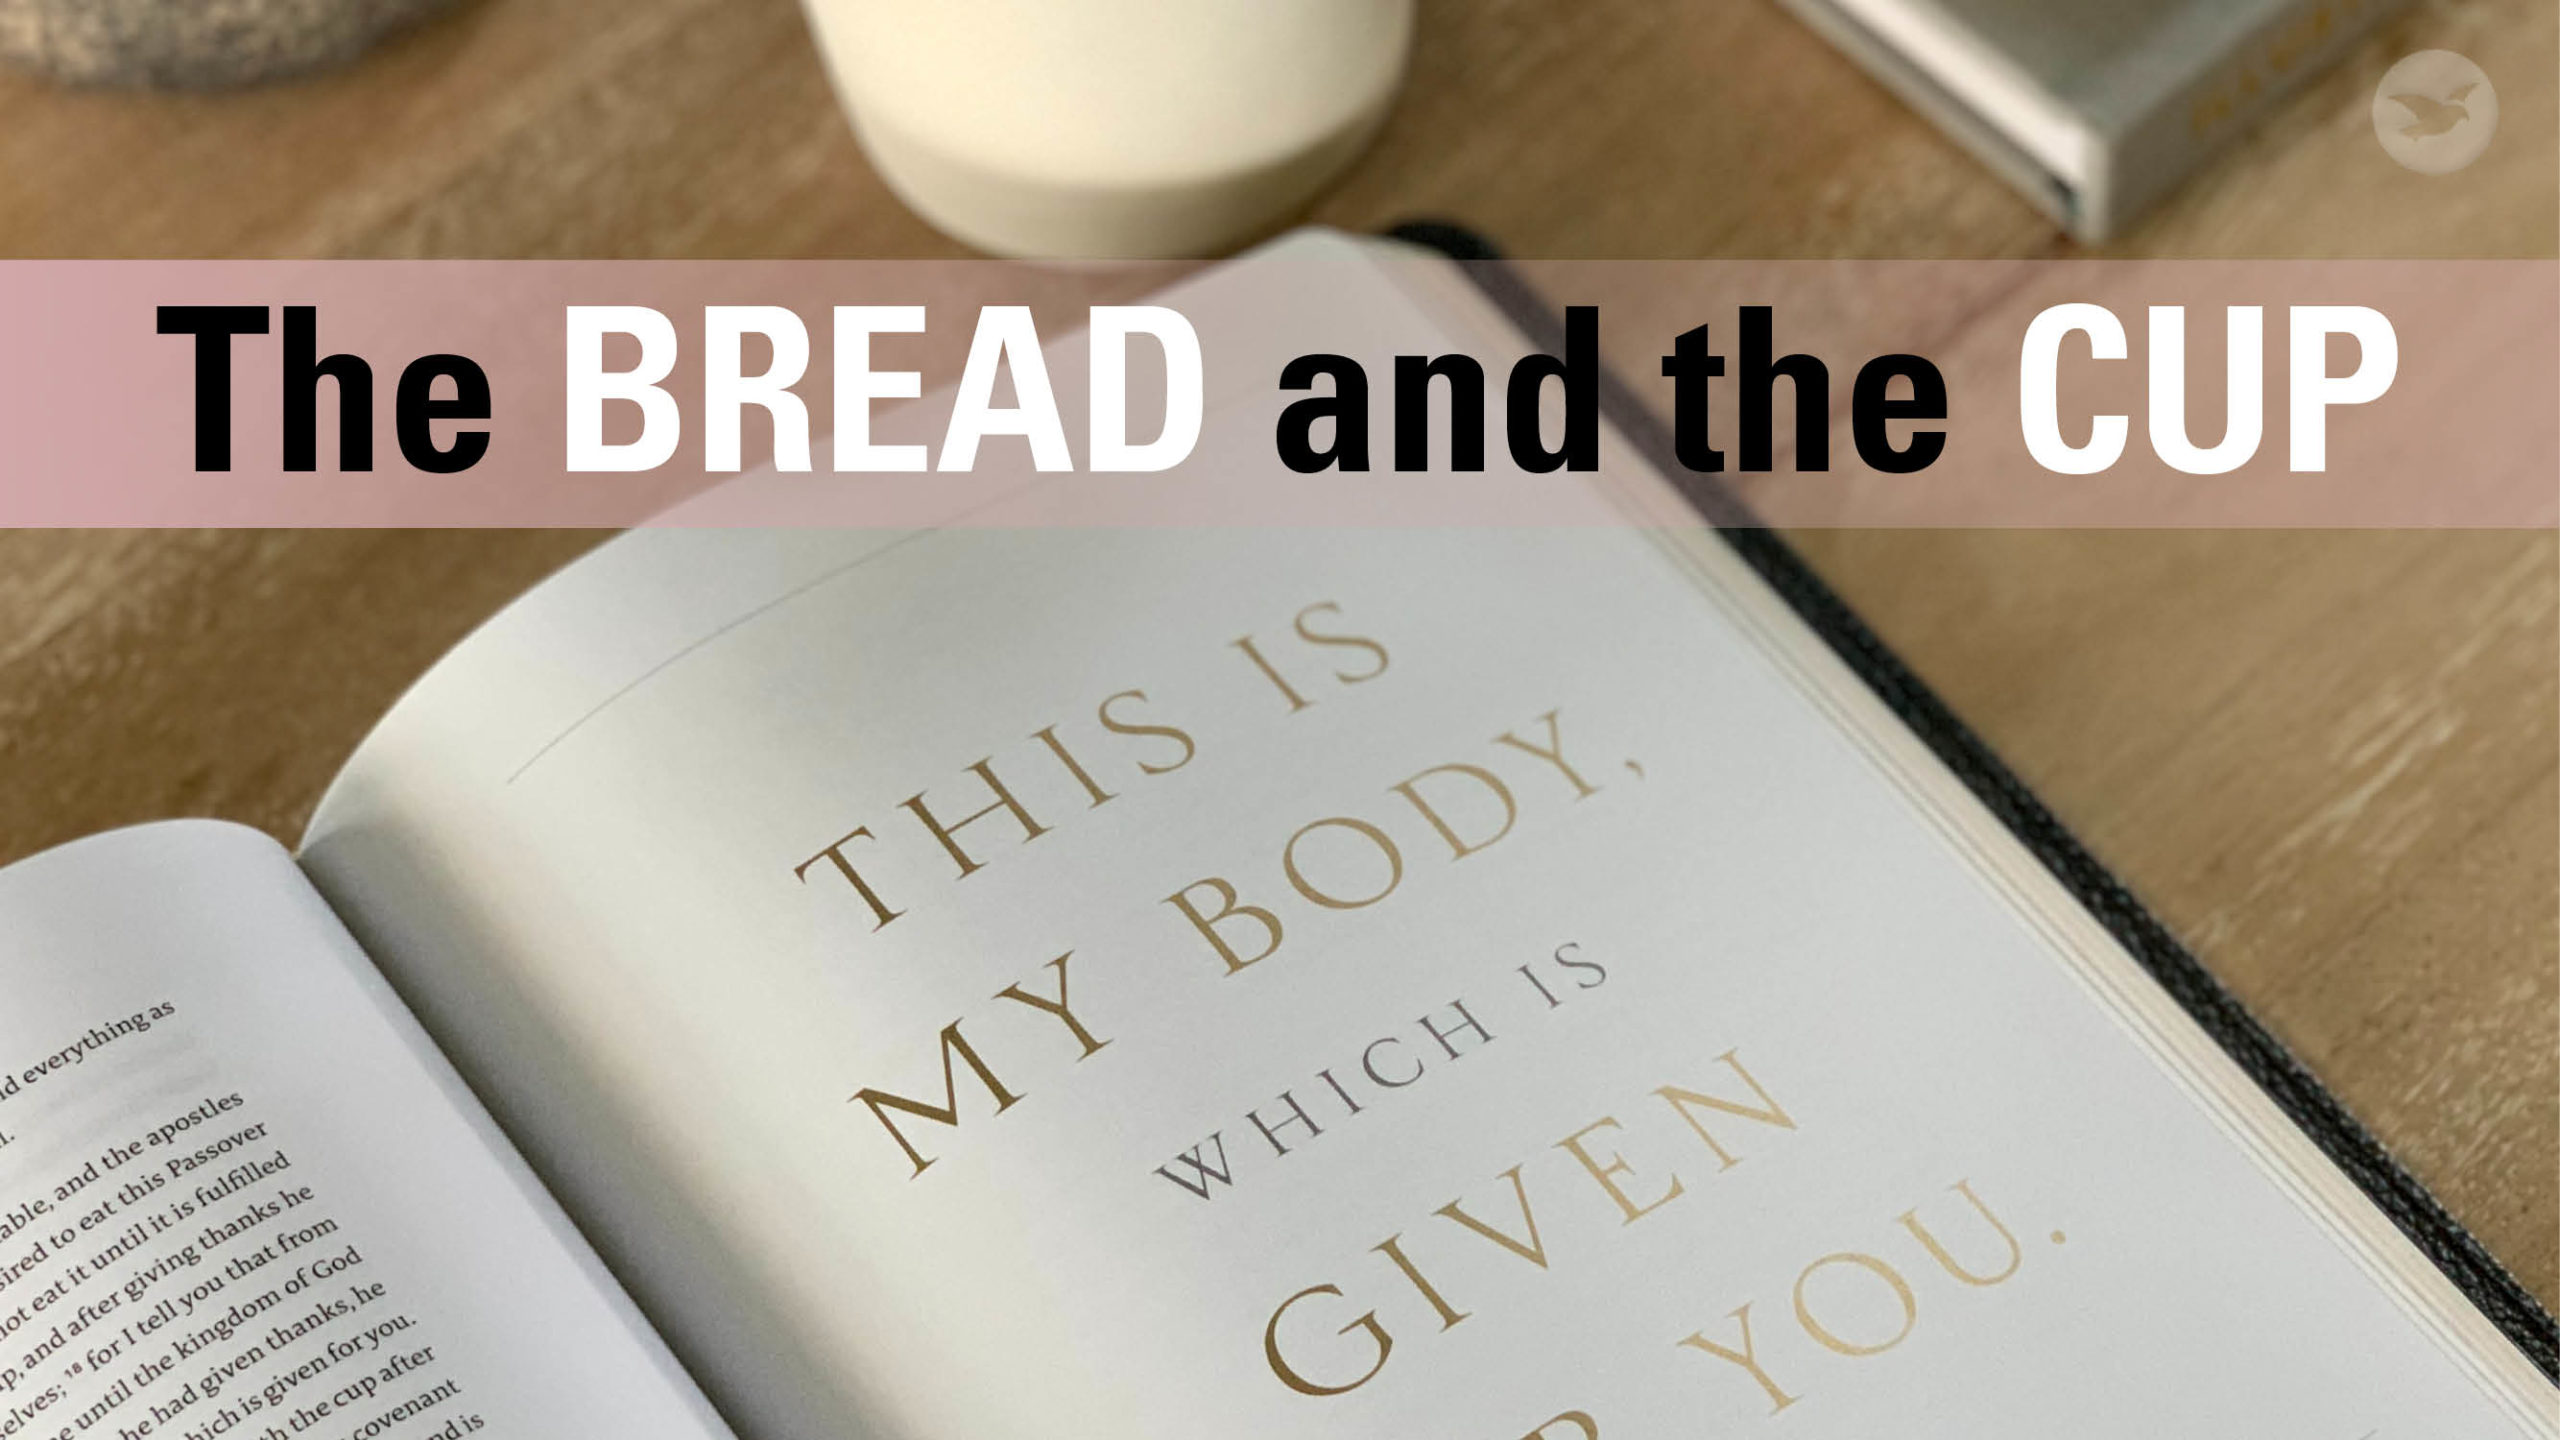 In this video, we explain from the Bible the material that is used in the Holy Communion. But the Holy Communion is more than the physical food and drink. We believe Jesus’ words that by partaking of the bread and the cup, we have eternal life in Him.